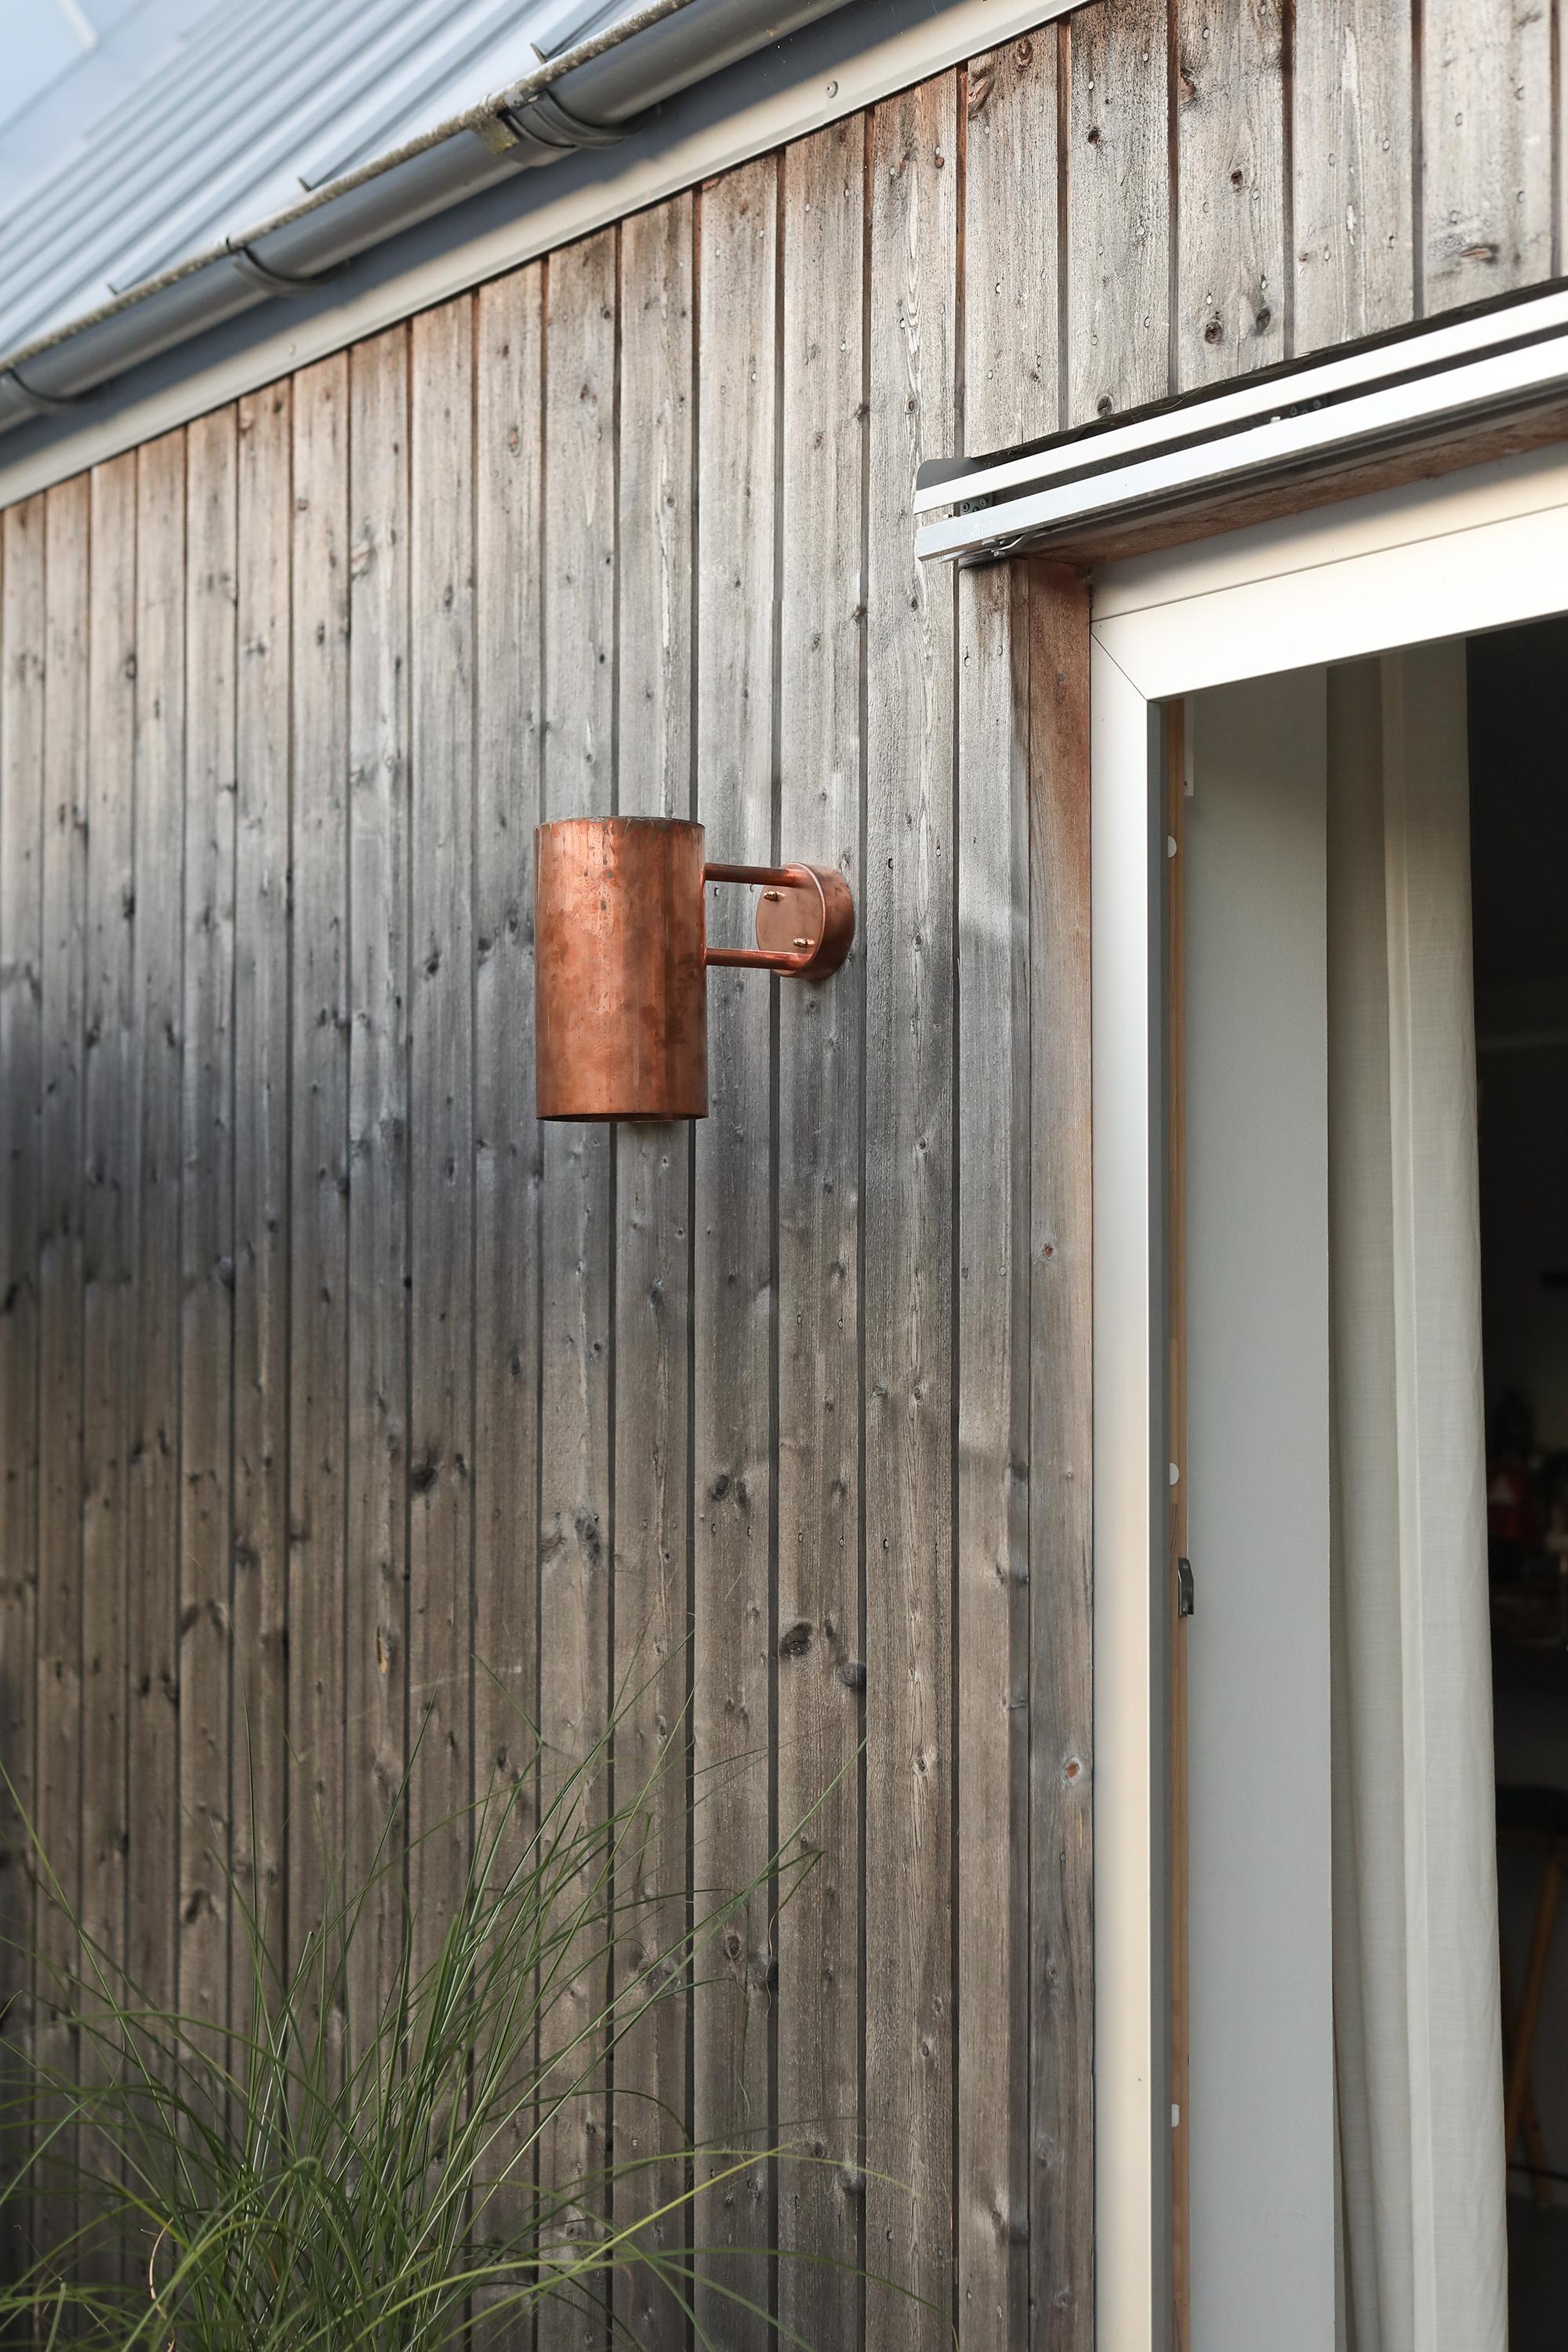 Large Hans-Agne Jakobsson C 627 'Rulle' raw copper outdoor sconce. An exclusive made for U.S. and UL listed authorized re-edition of the classic Swedish design executed in raw unlacquered and unpolished copper. An incredibly refined design that is